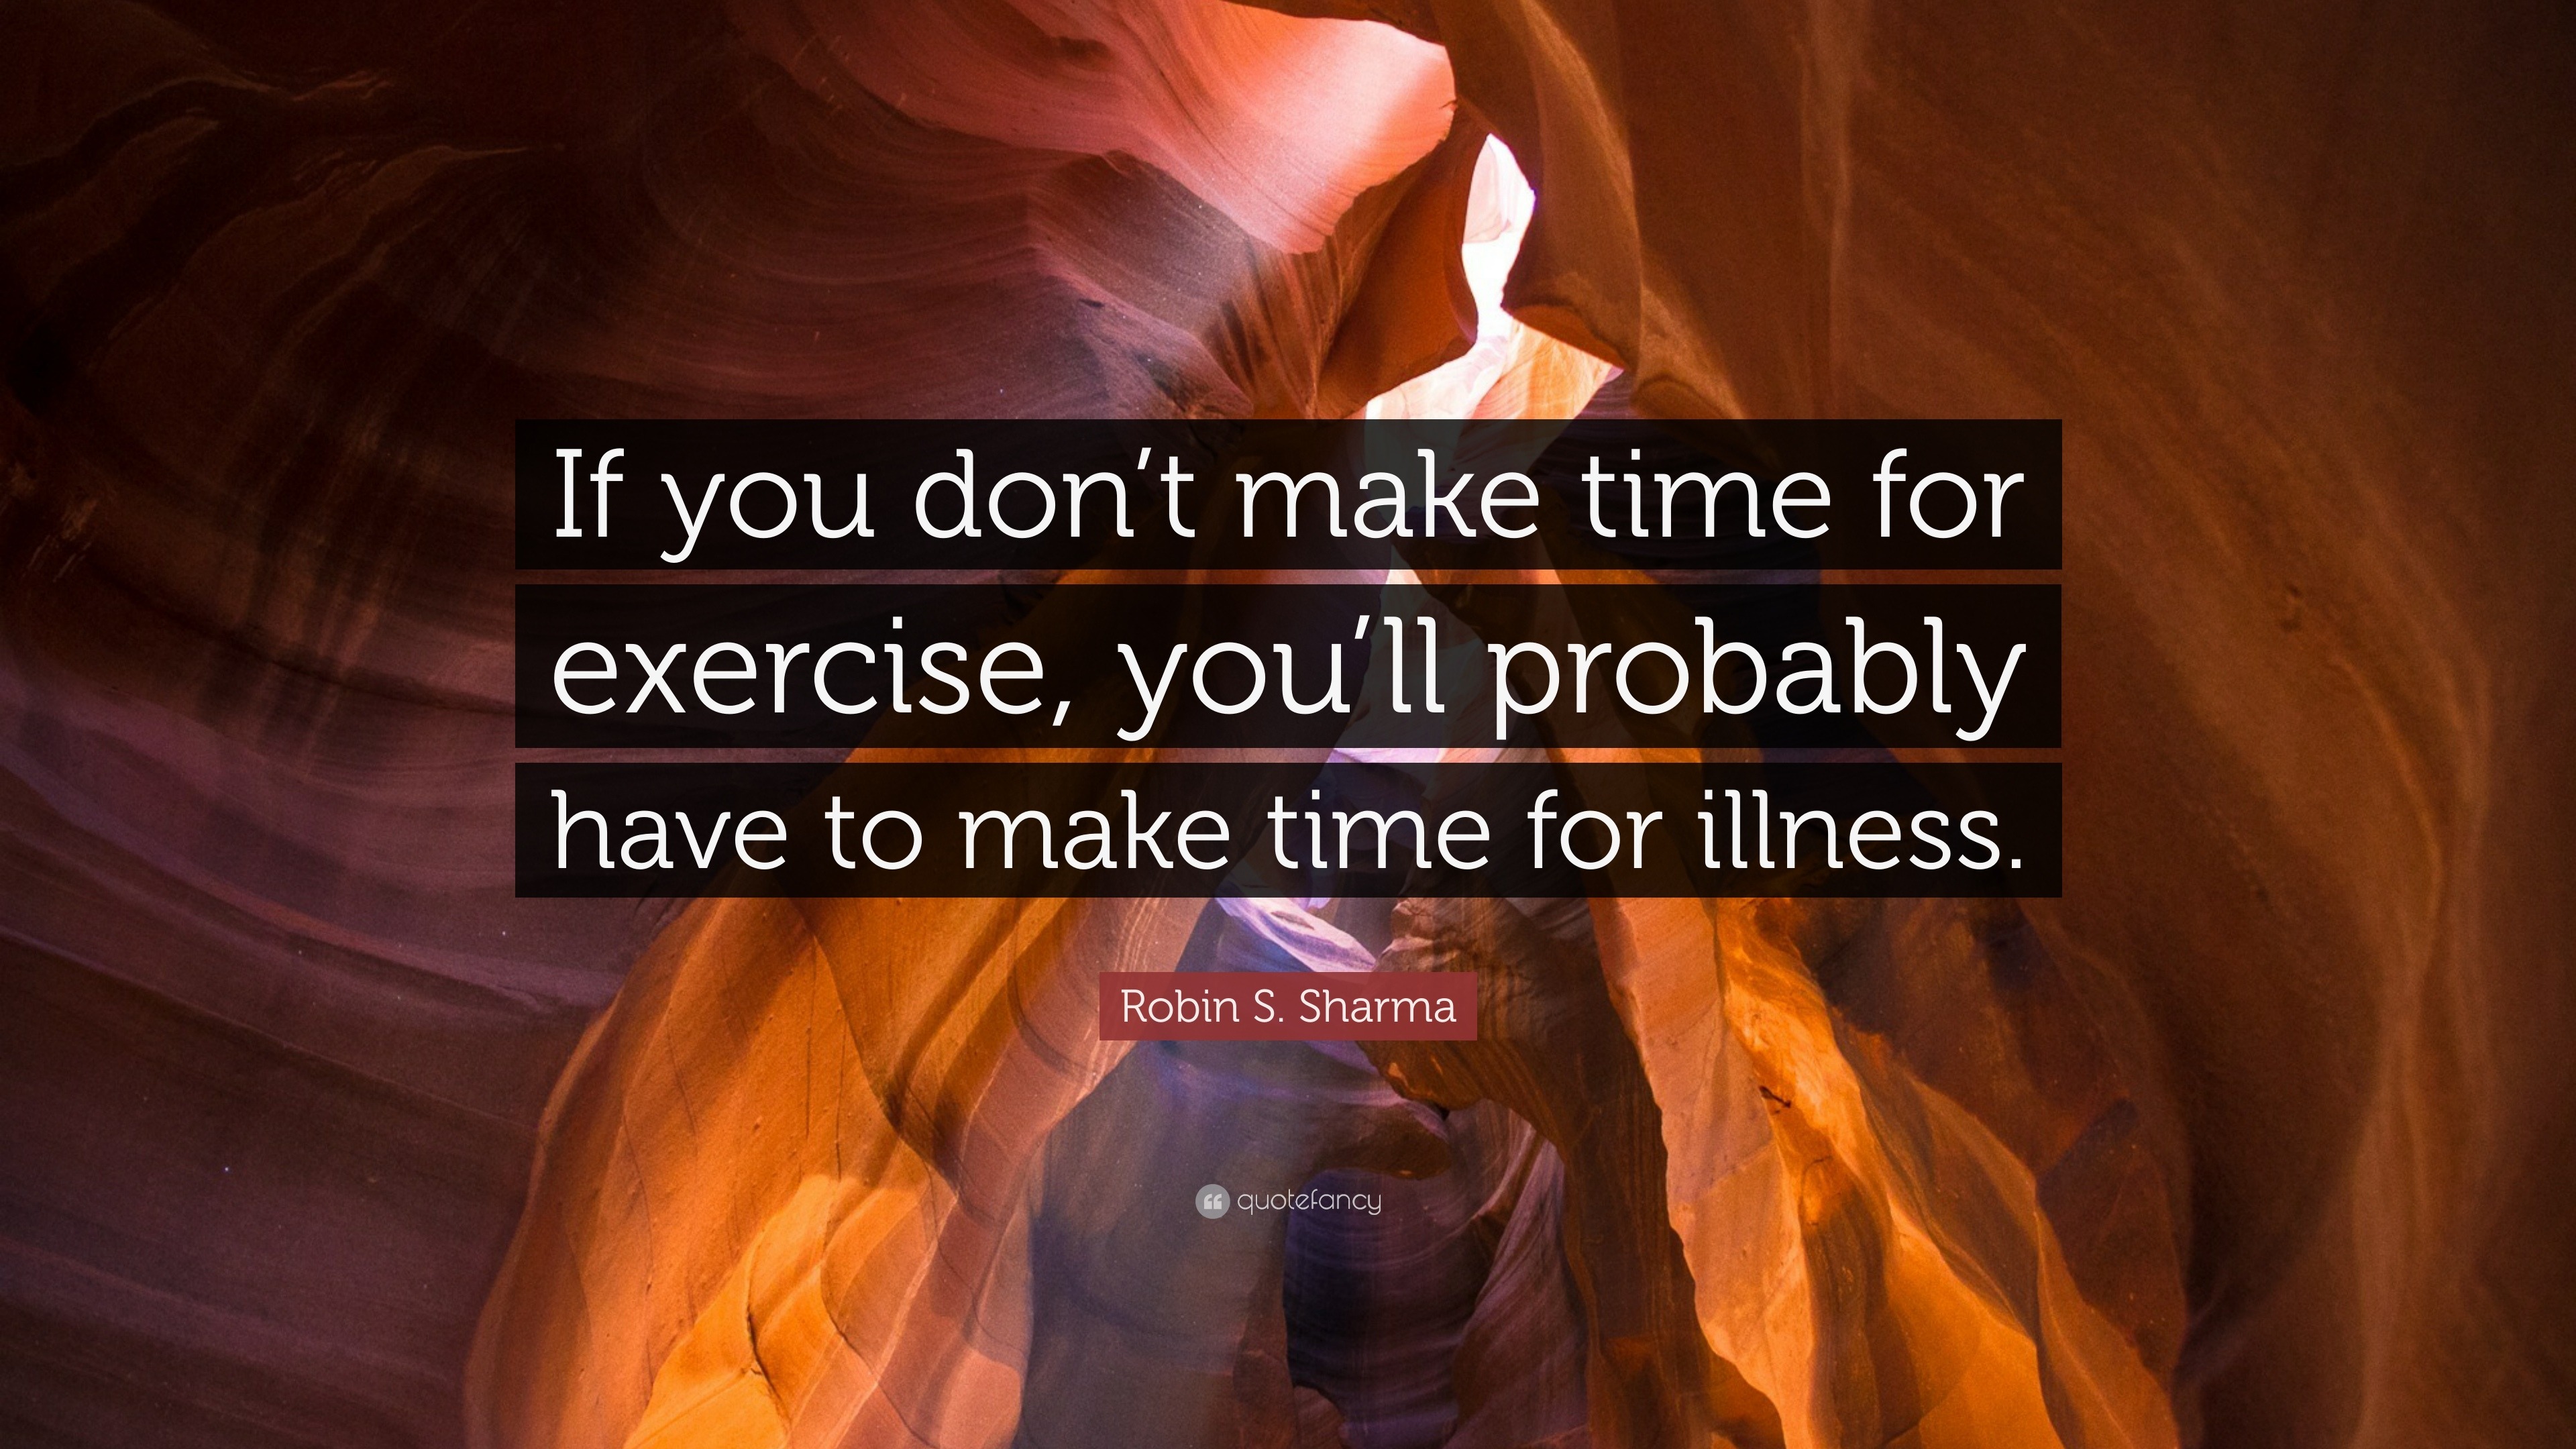 Robin S. Sharma Quote: “If you don’t make time for exercise, you’ll